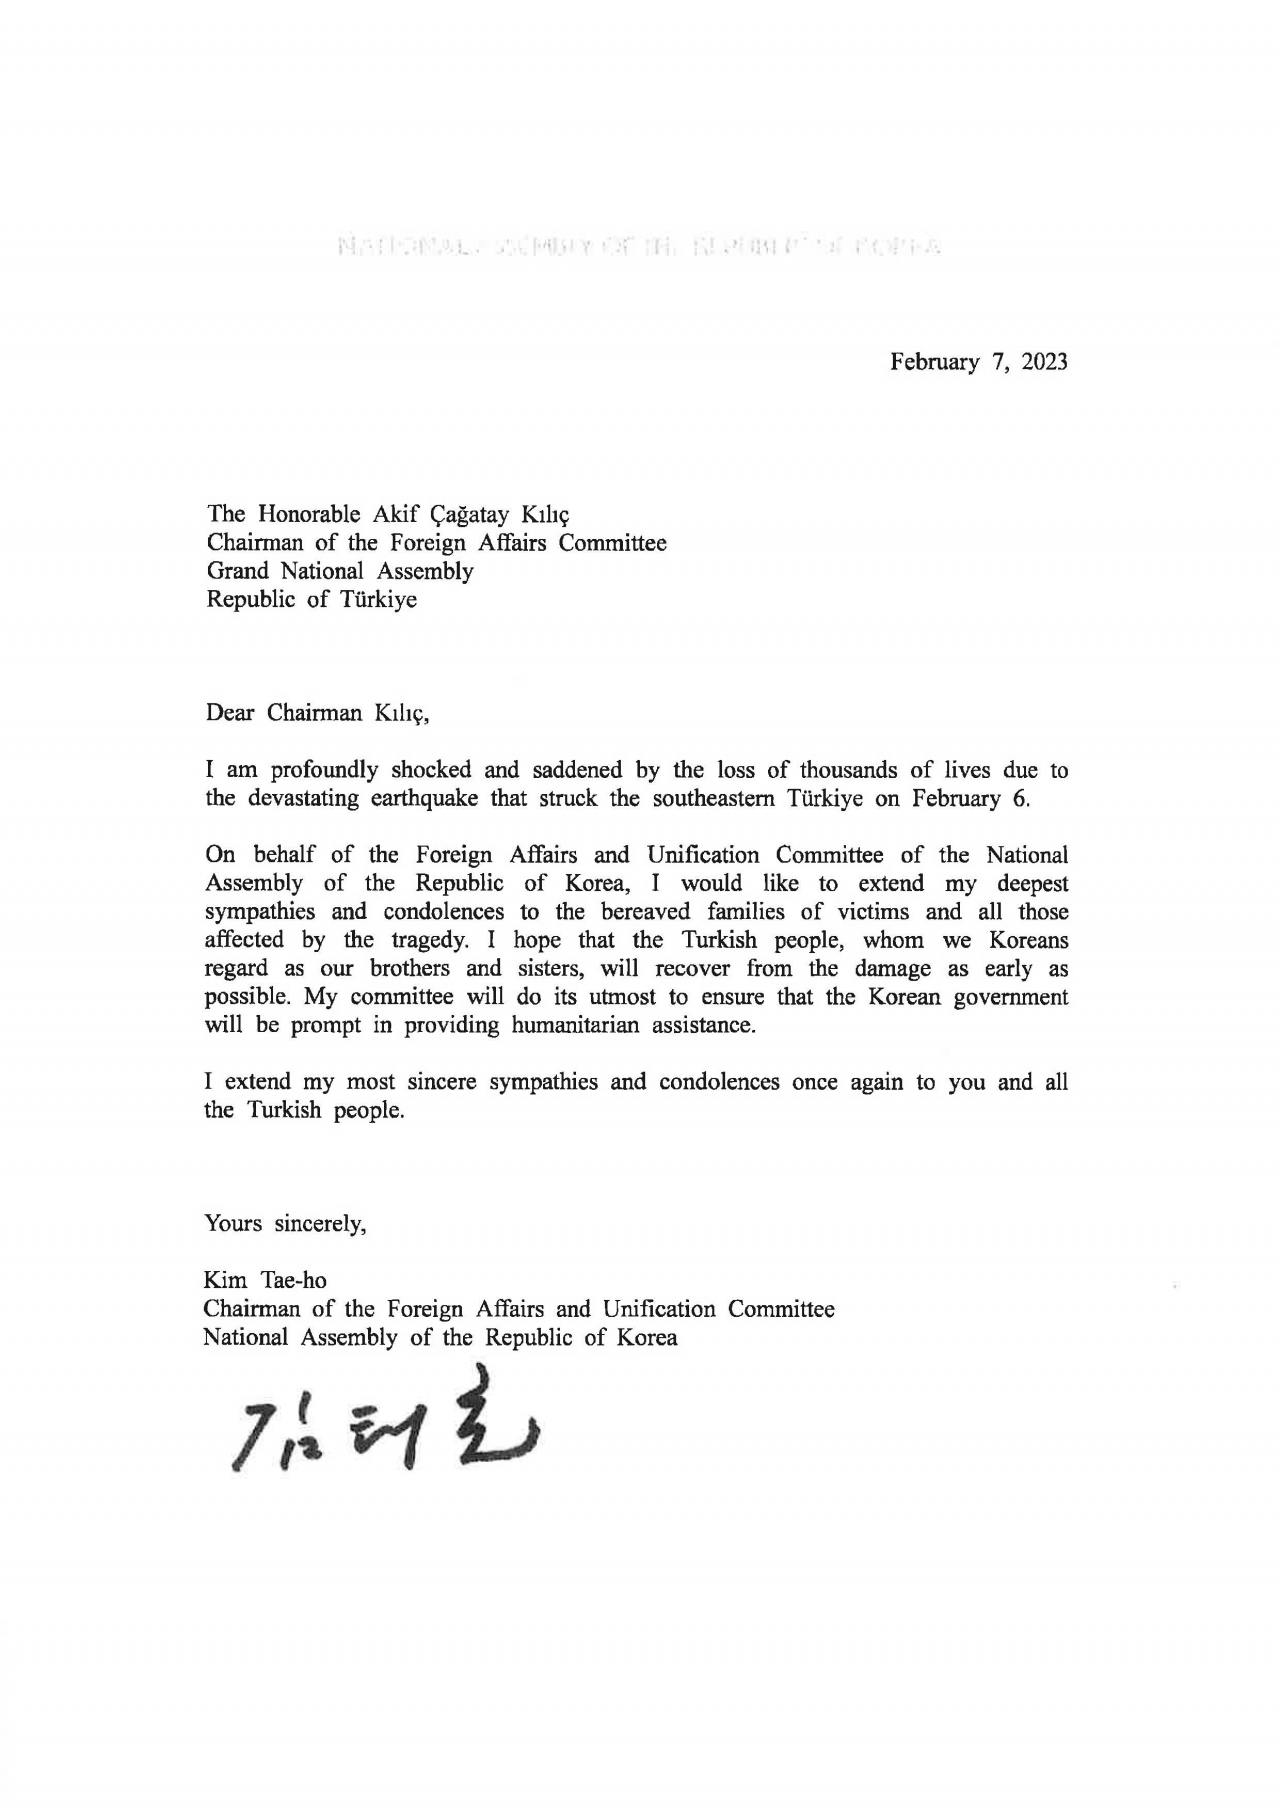 Rep. Kim Tae-ho, head of the South Korean parliamentary committee for foreign affairs, sends a letter of condolences to his Turkish counterpart Akif Catagay Kilic. (Kim’s office)